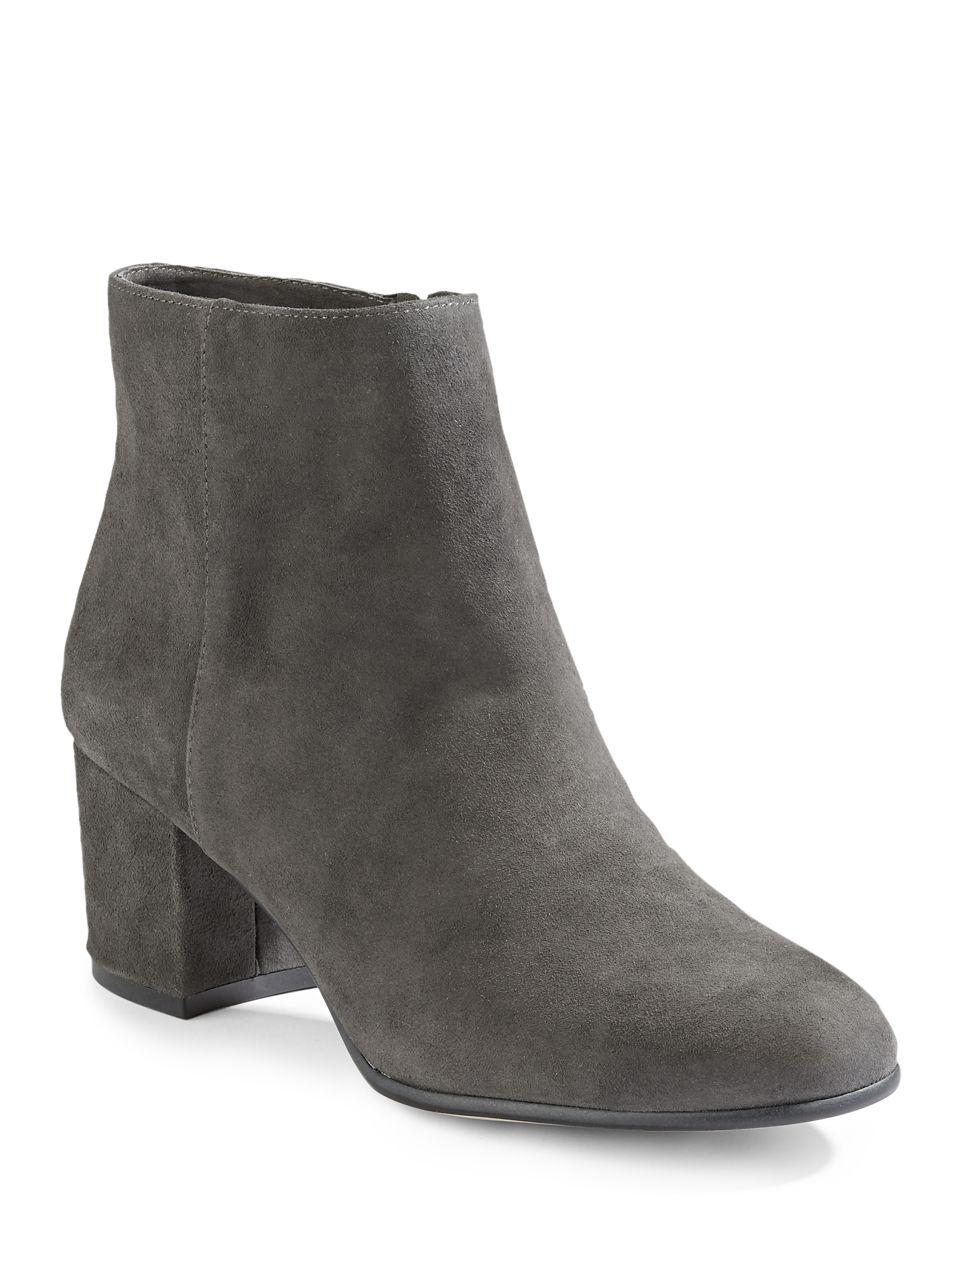 424 fifth Elyssa Suede Ankle Boots in Gray | Lyst